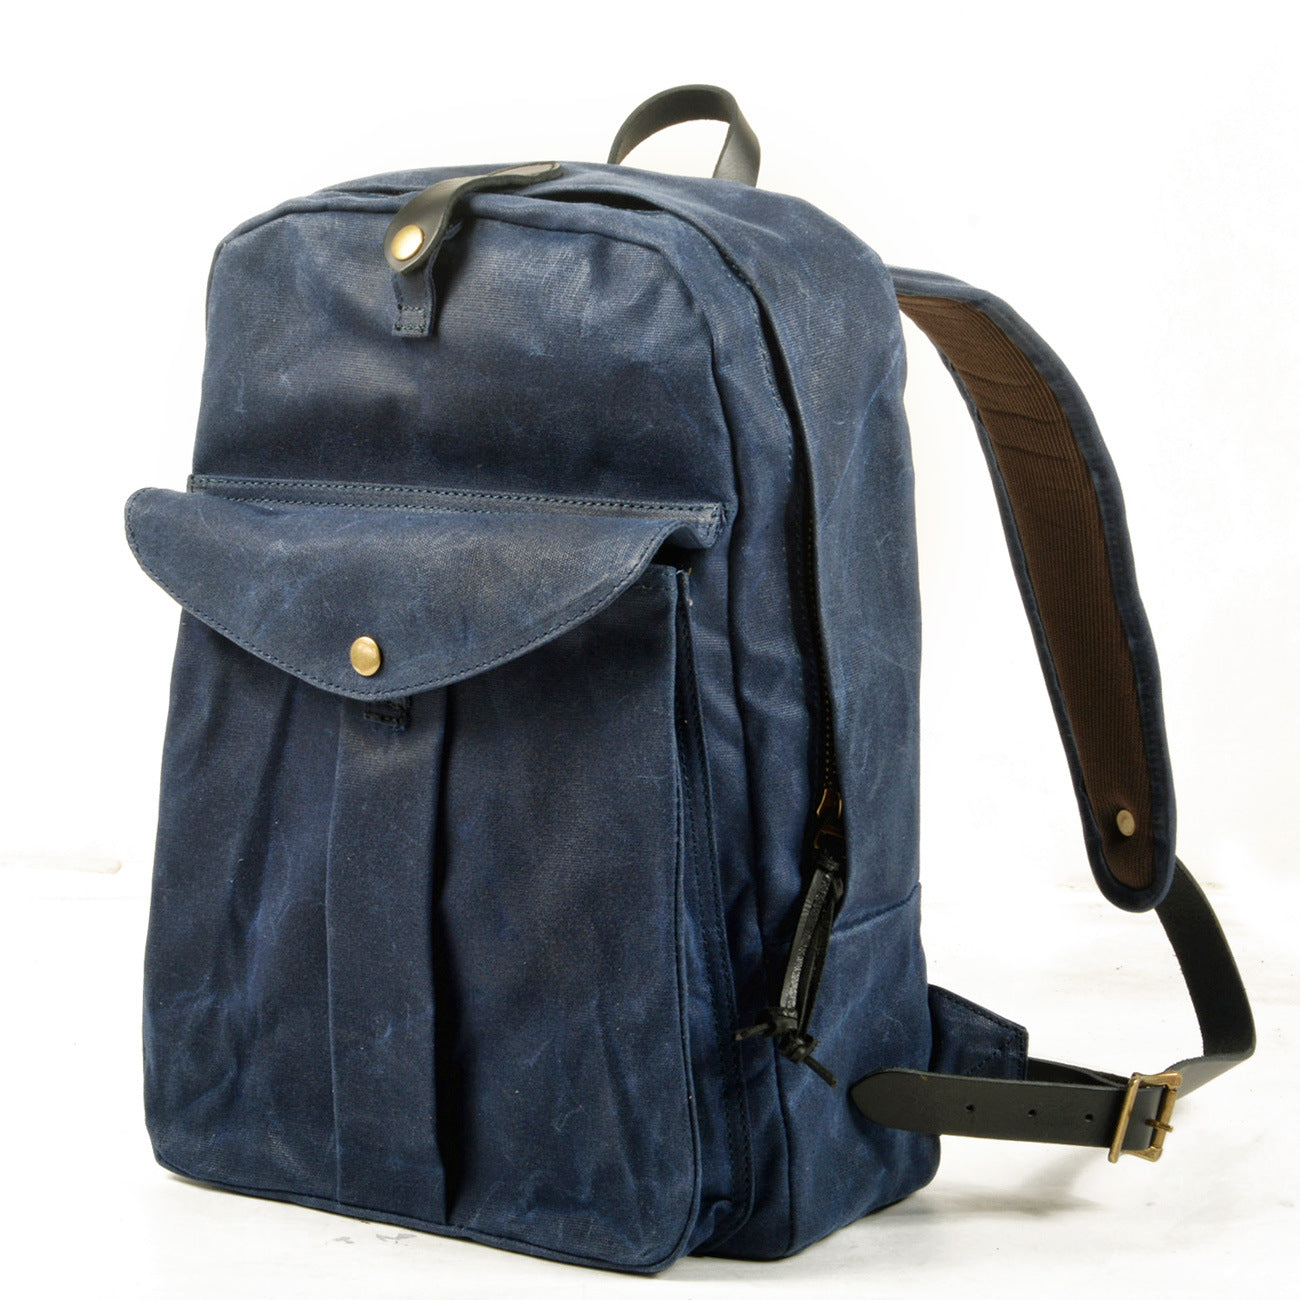 Vintage Water-resistant Canvas Hiking Backpack-Canvas Backpack-Dark Blue-Free Shipping Leatheretro